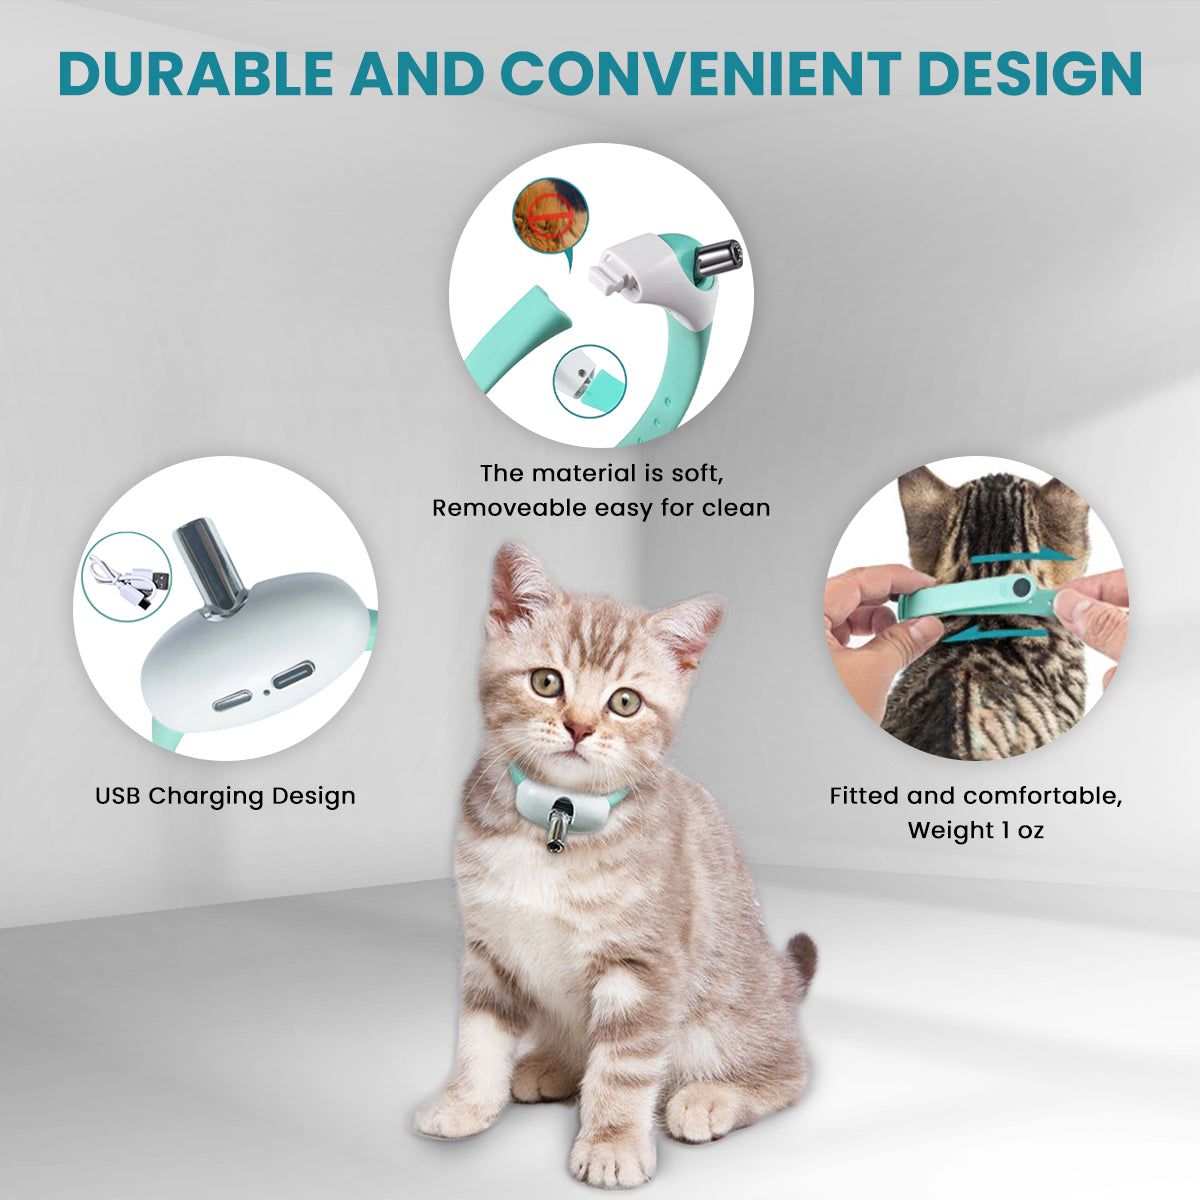 Fridysee Smart Laser Cat Toy Collar